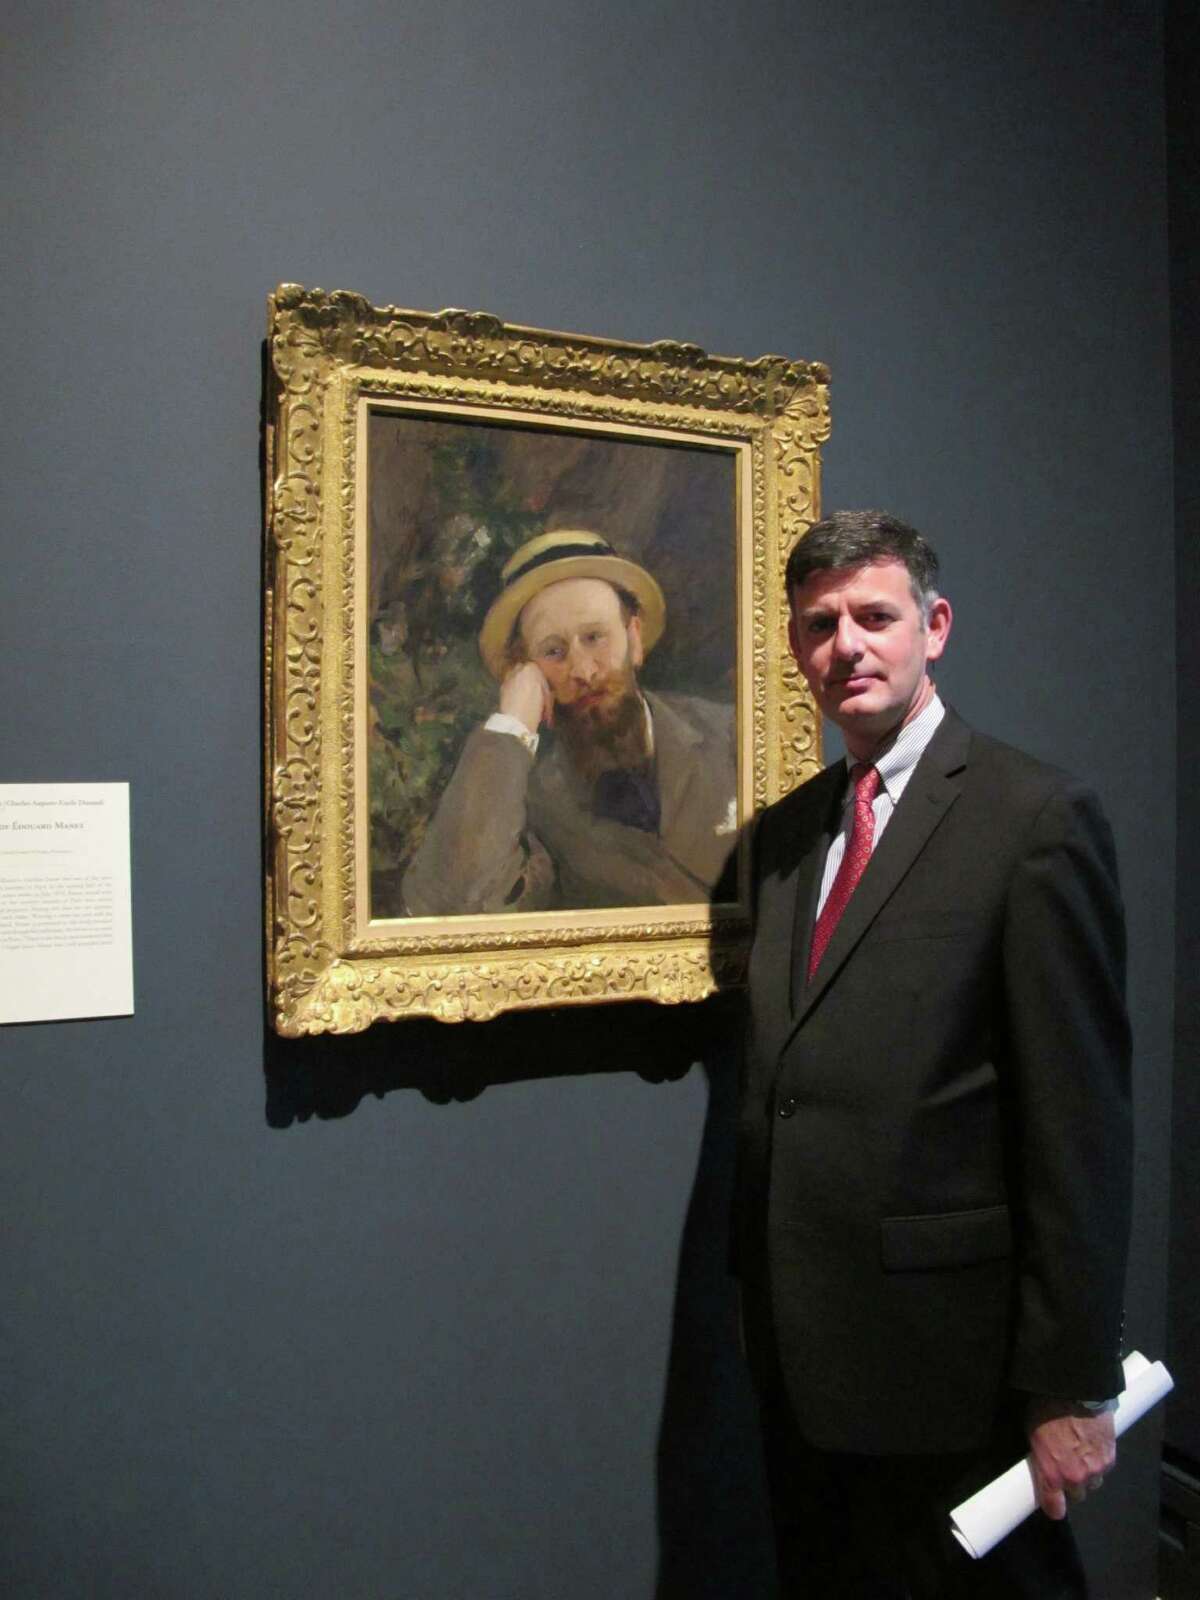 Brian Kennedy, director of the Toledo Museum of Art, poses in front of a portrait of French Impressionist Edouard Manet, Wednesday, Oct. 3, 2012, in Toledo, Ohio. An exhibition of Manet's works opened this month and runs through the end of the year before moving onto the Royal Academy of Arts in London. (AP Photo/John Seewer)